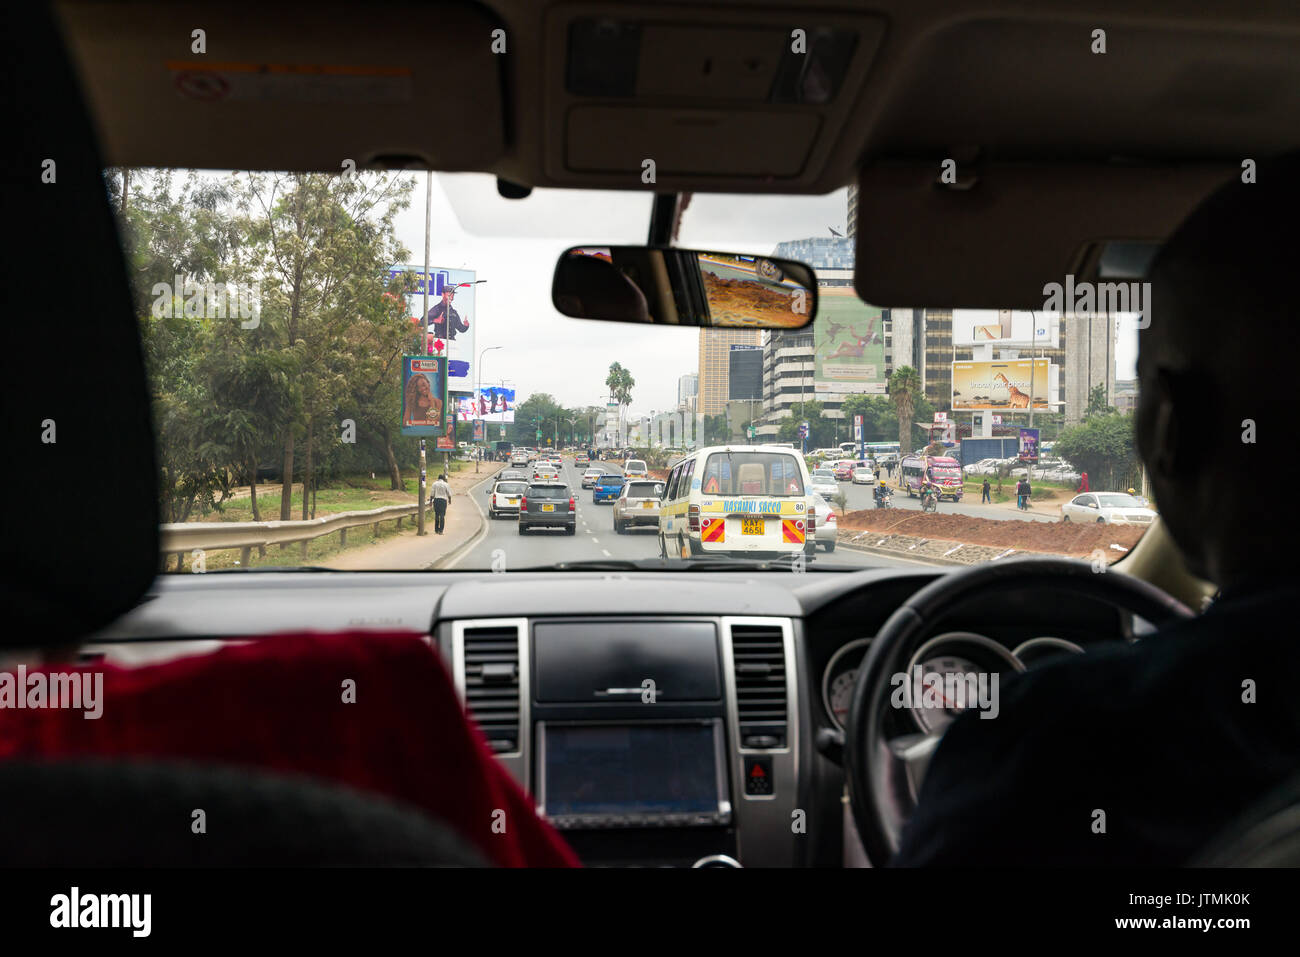 Uhuru highway in Narobi city from Uber taxi vehicle interior showing road and other vehicles, Kenya Stock Photo